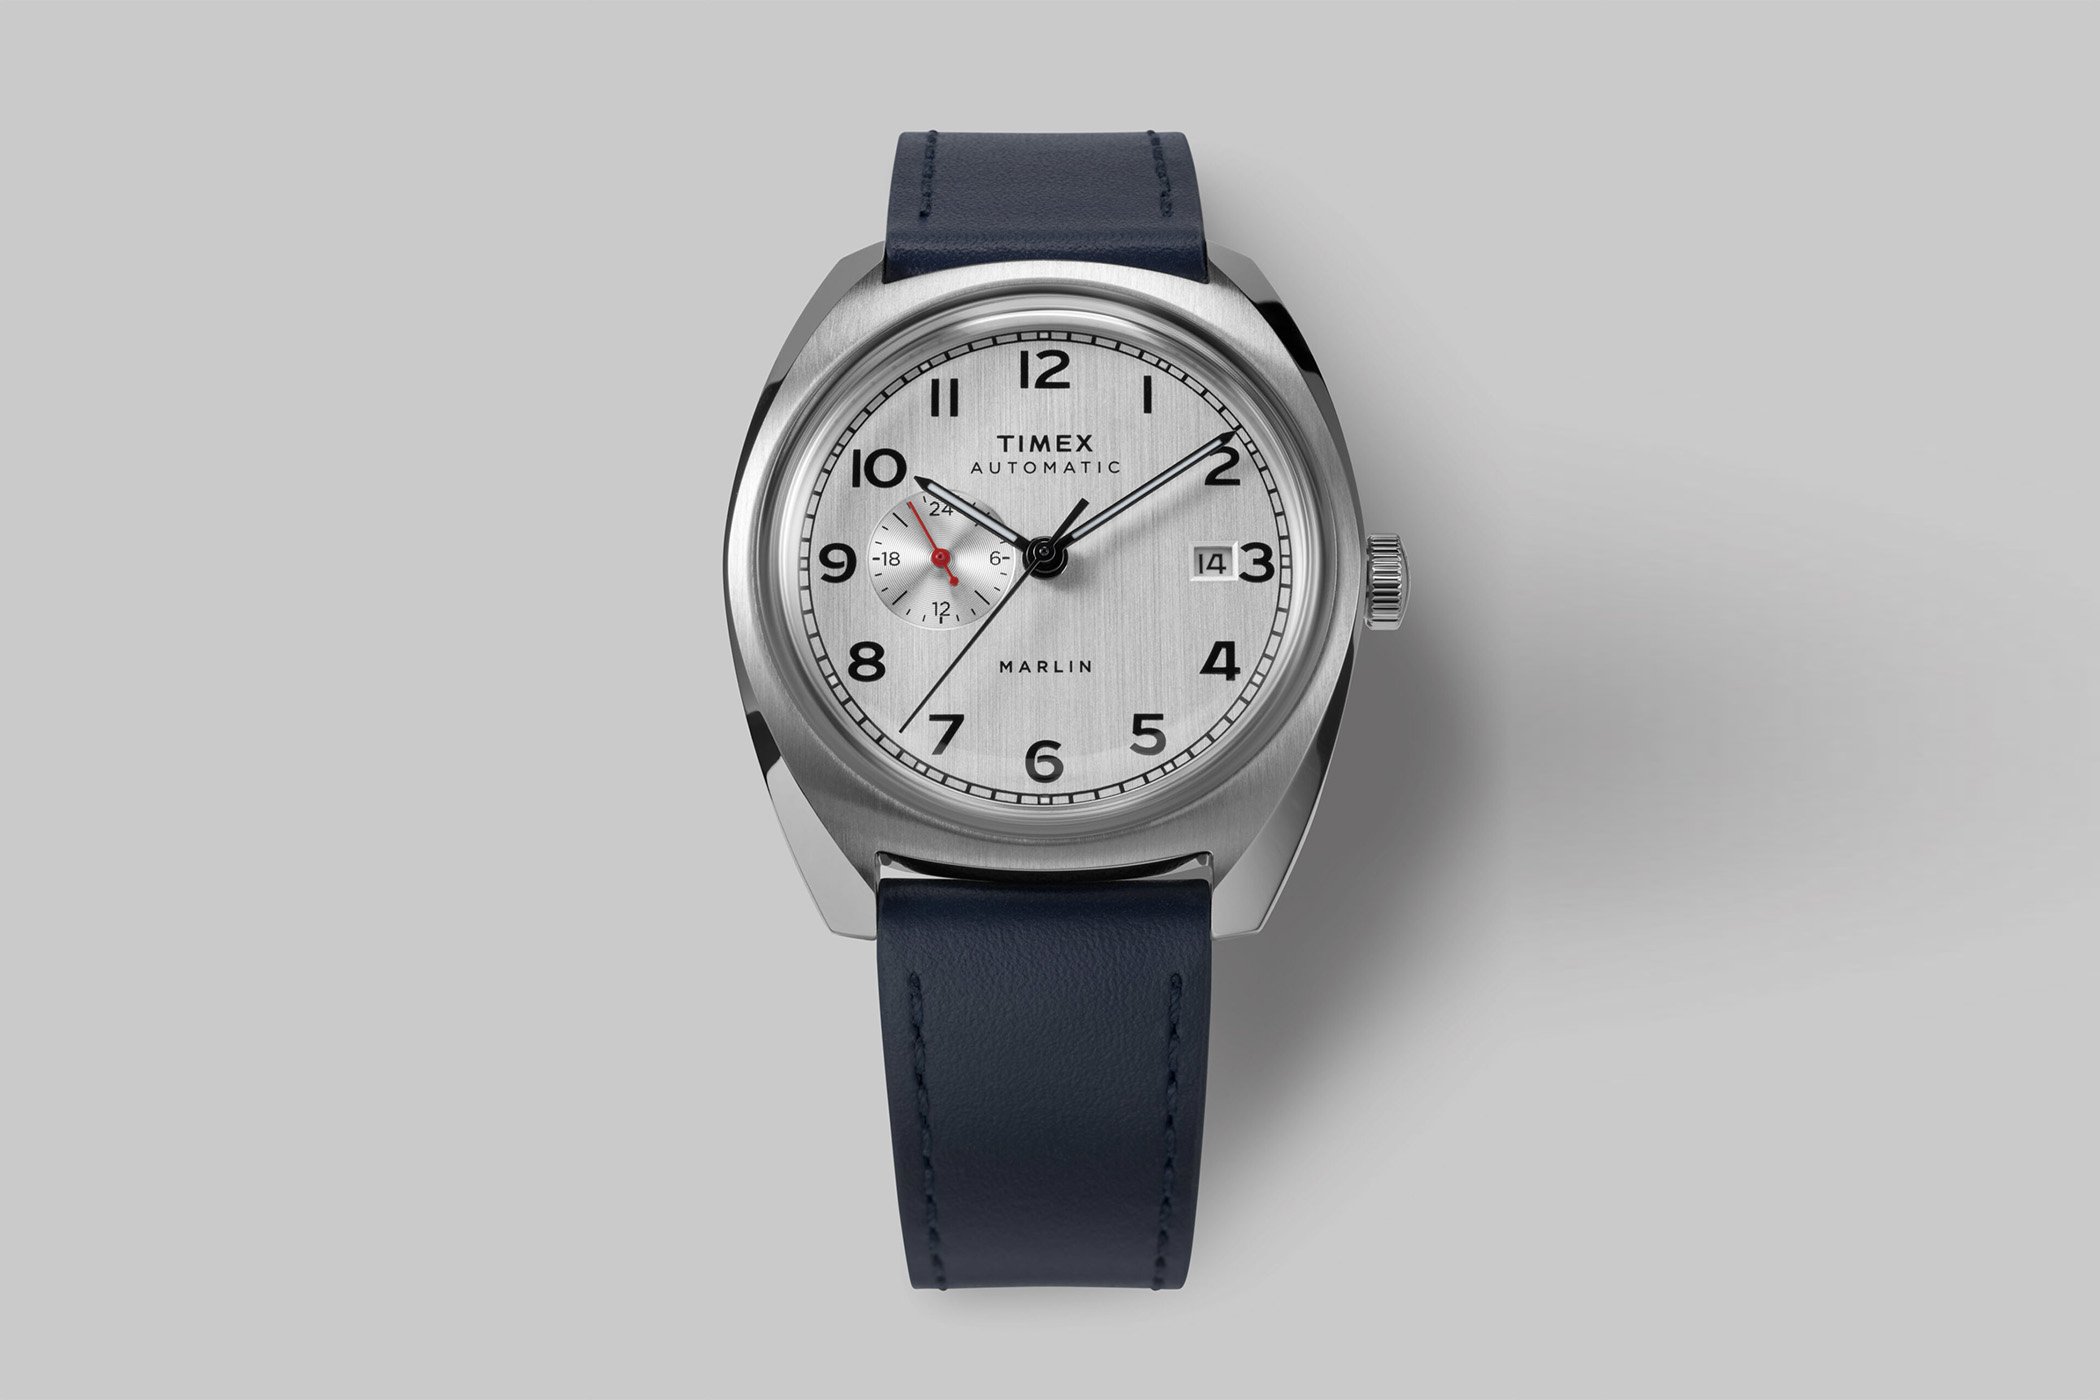 Timex Marlin Sub-Dial Automatic Watches